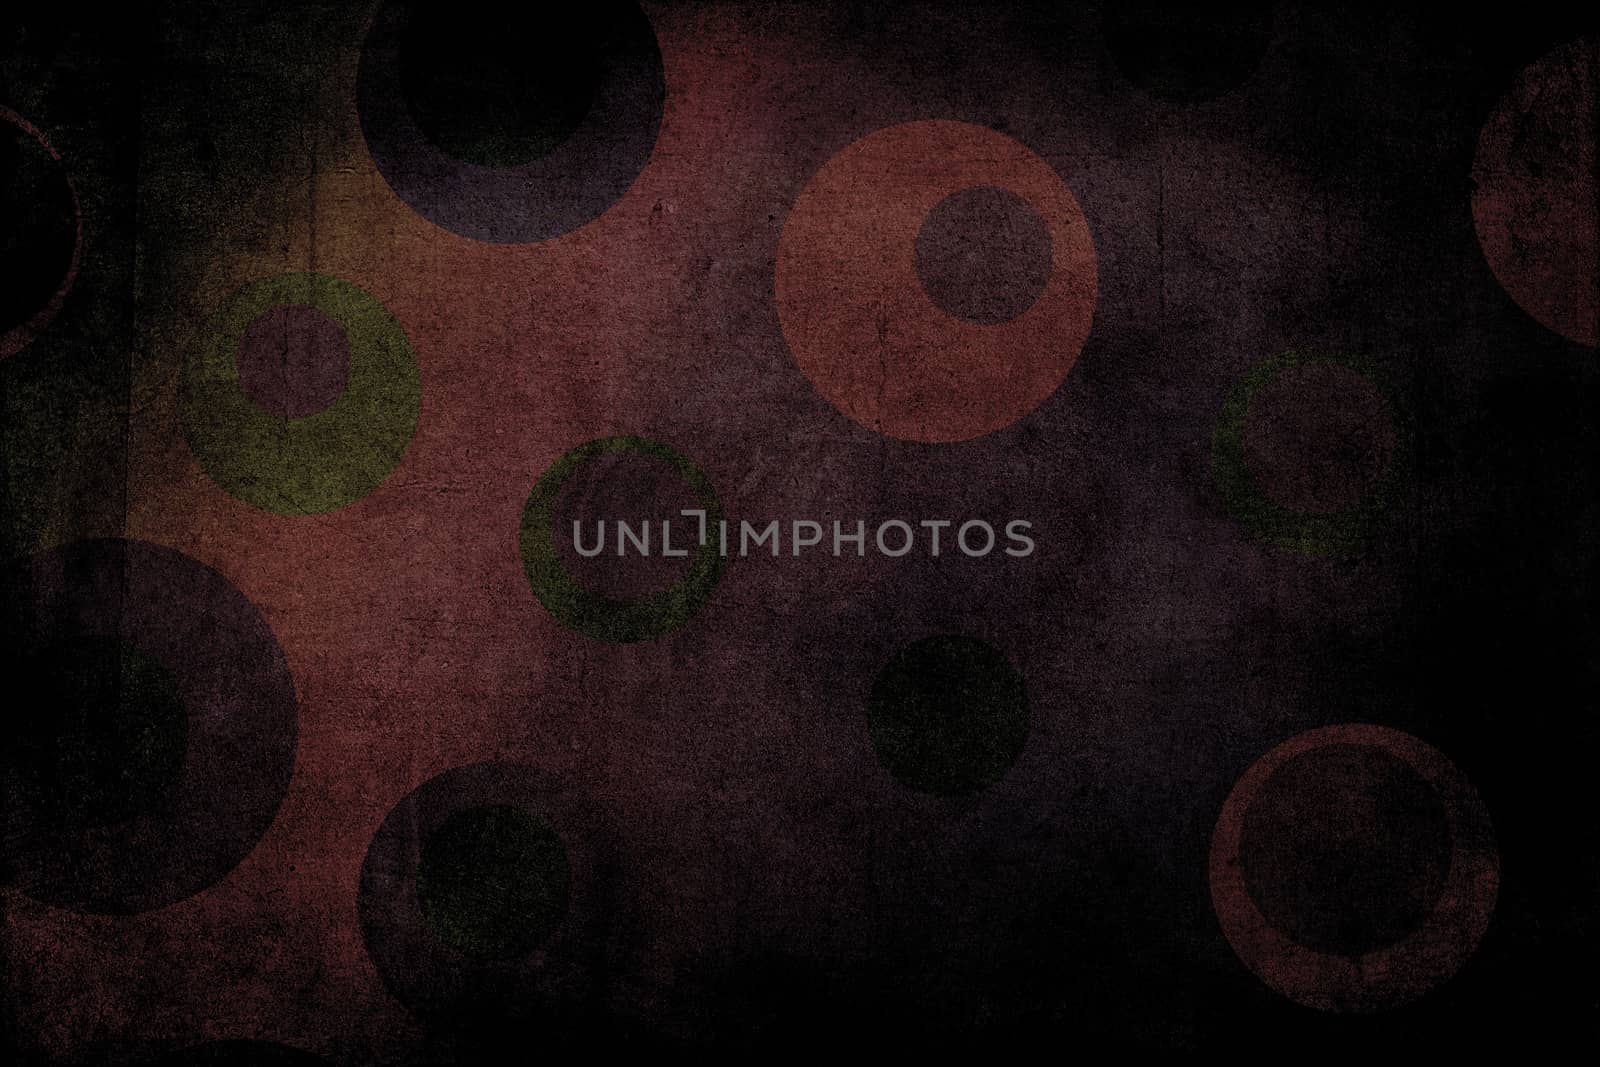 Dark texture background made of  red and green dots, or circles